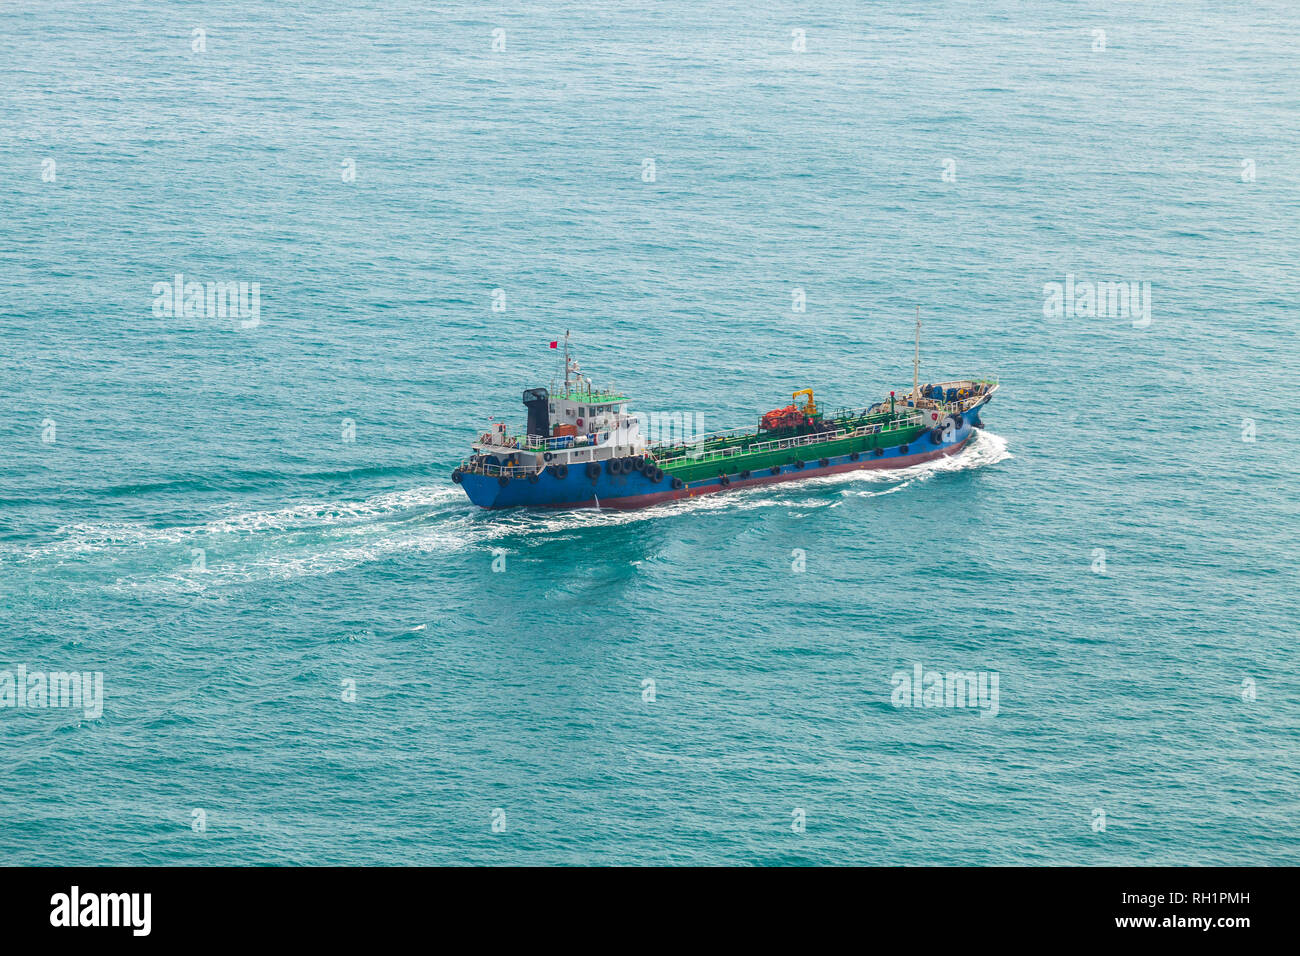 Tanker ship goes in Busan port area at sunny day, Japan Sea, South Korea Stock Photo